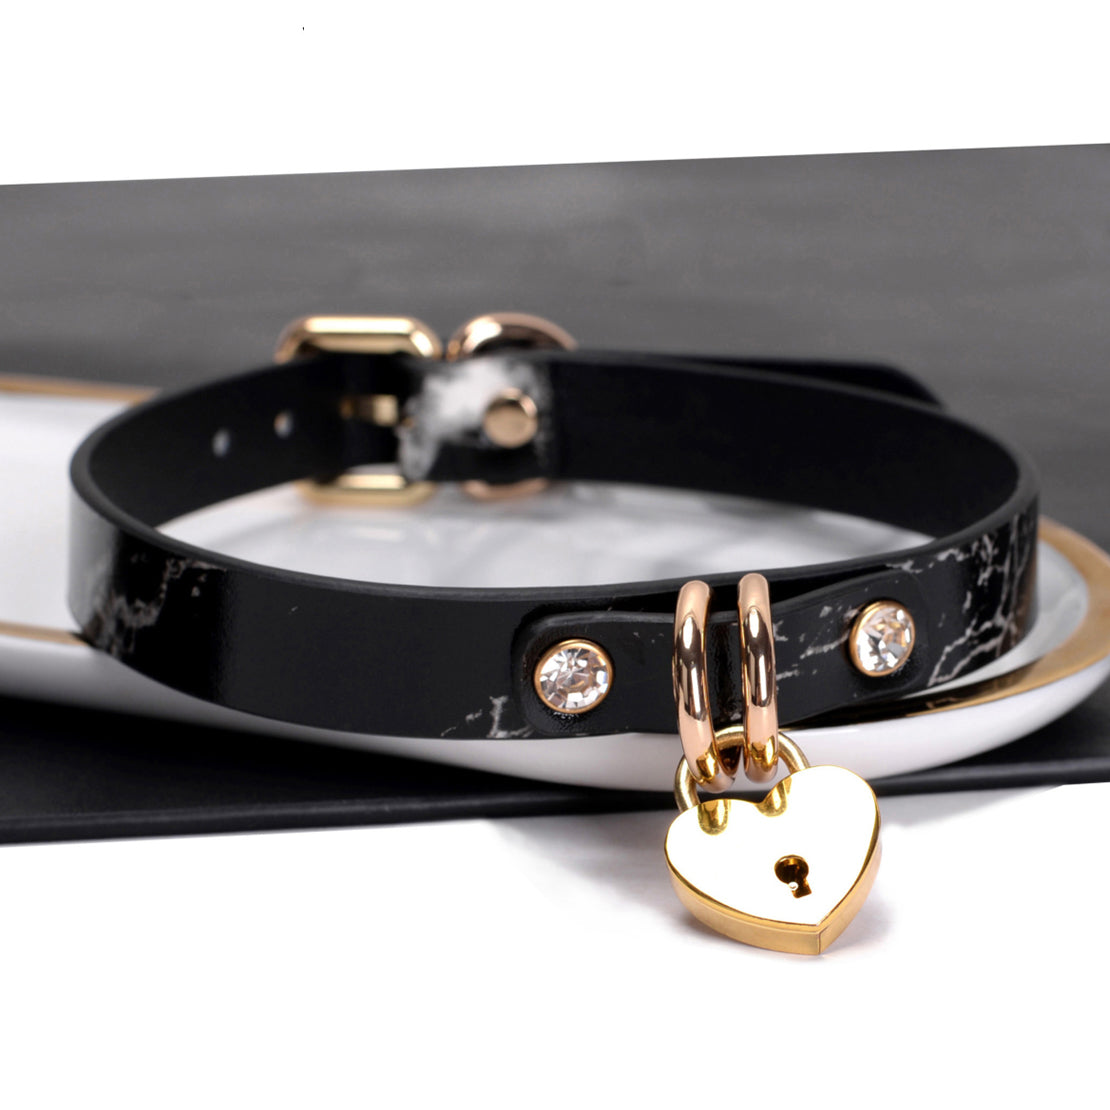 Gem/Heart Lock Marble-Pattern Real Leather Collar with Leash